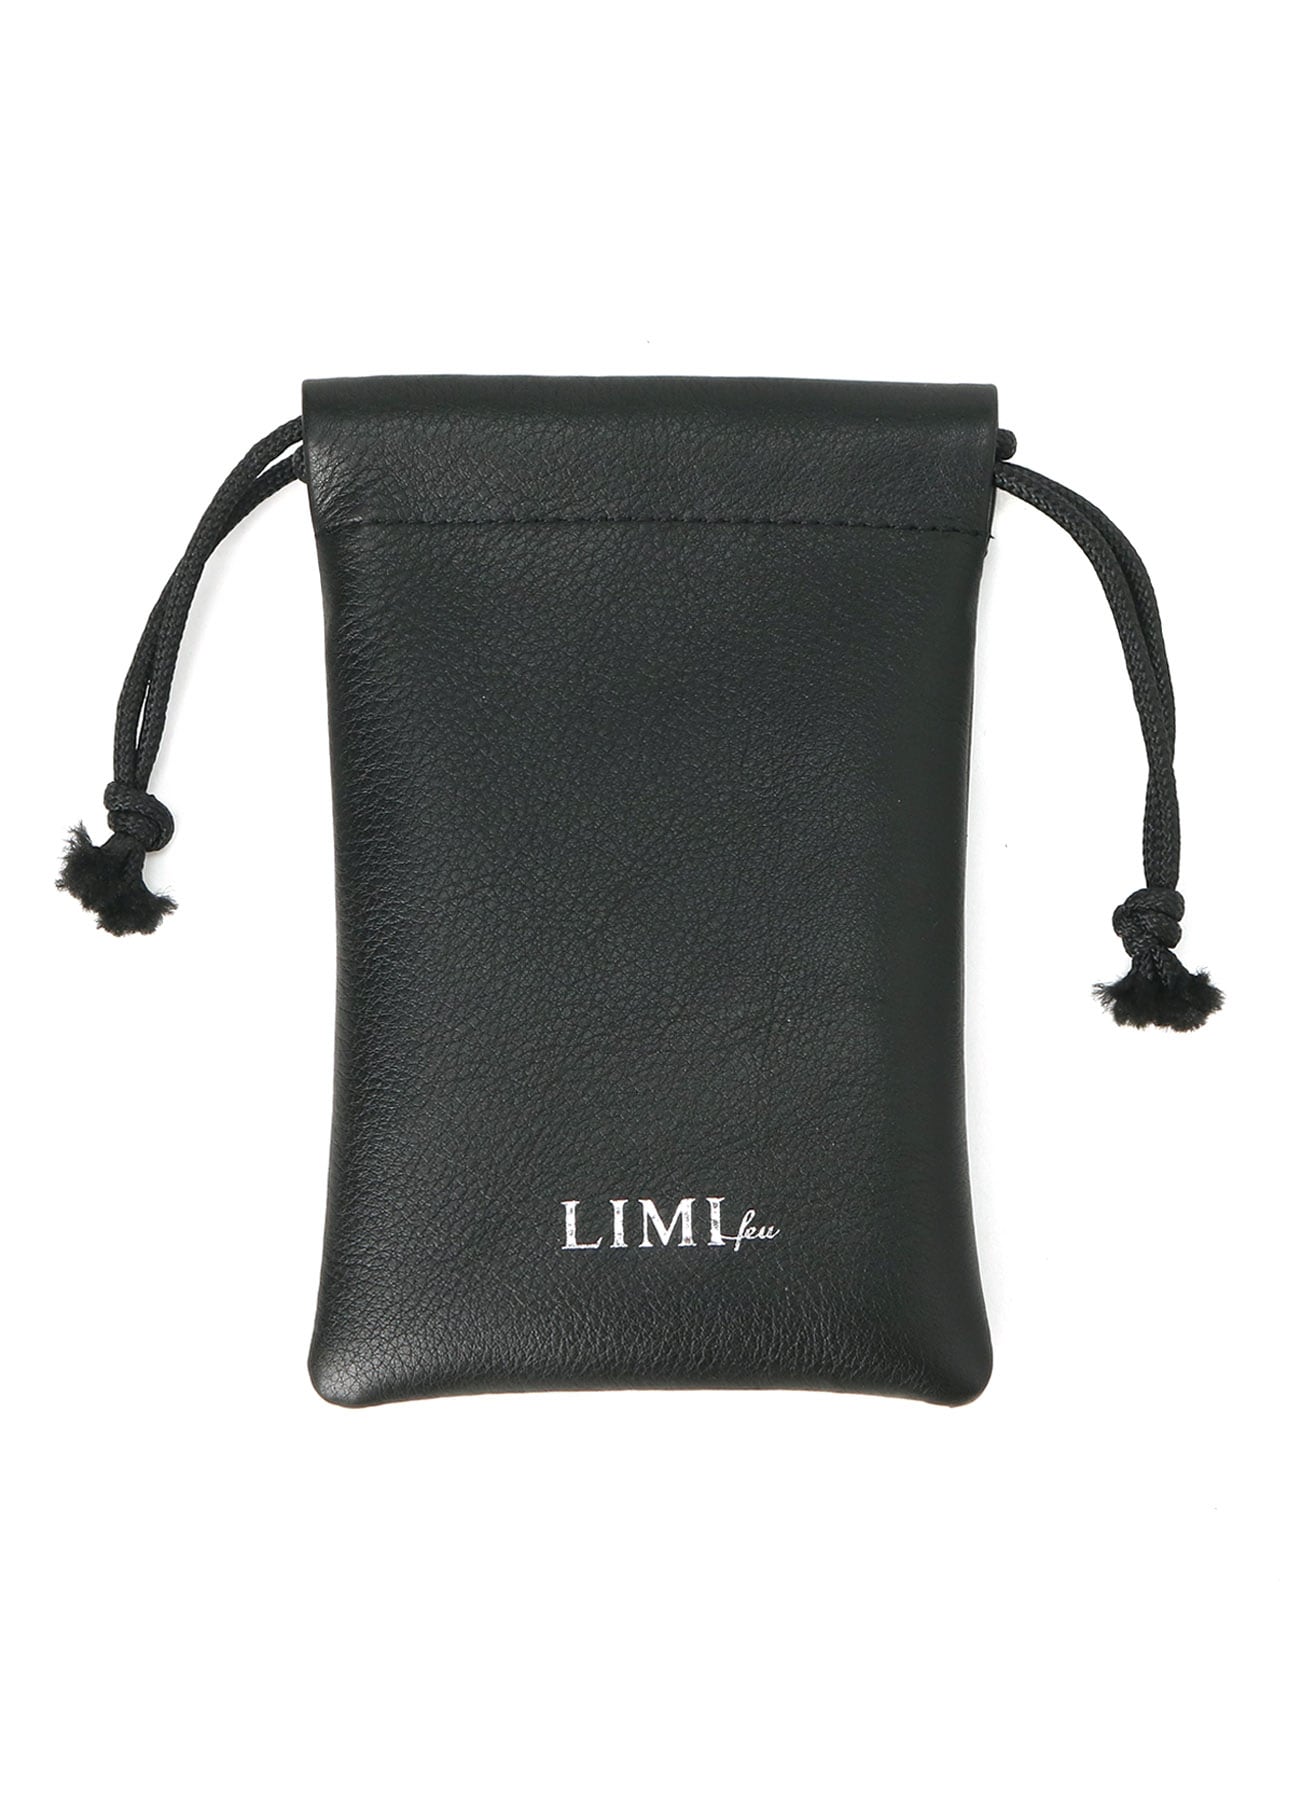 LIMI feu x uka NAIL OIL METAL CARRIER CASE WITH CHAIN